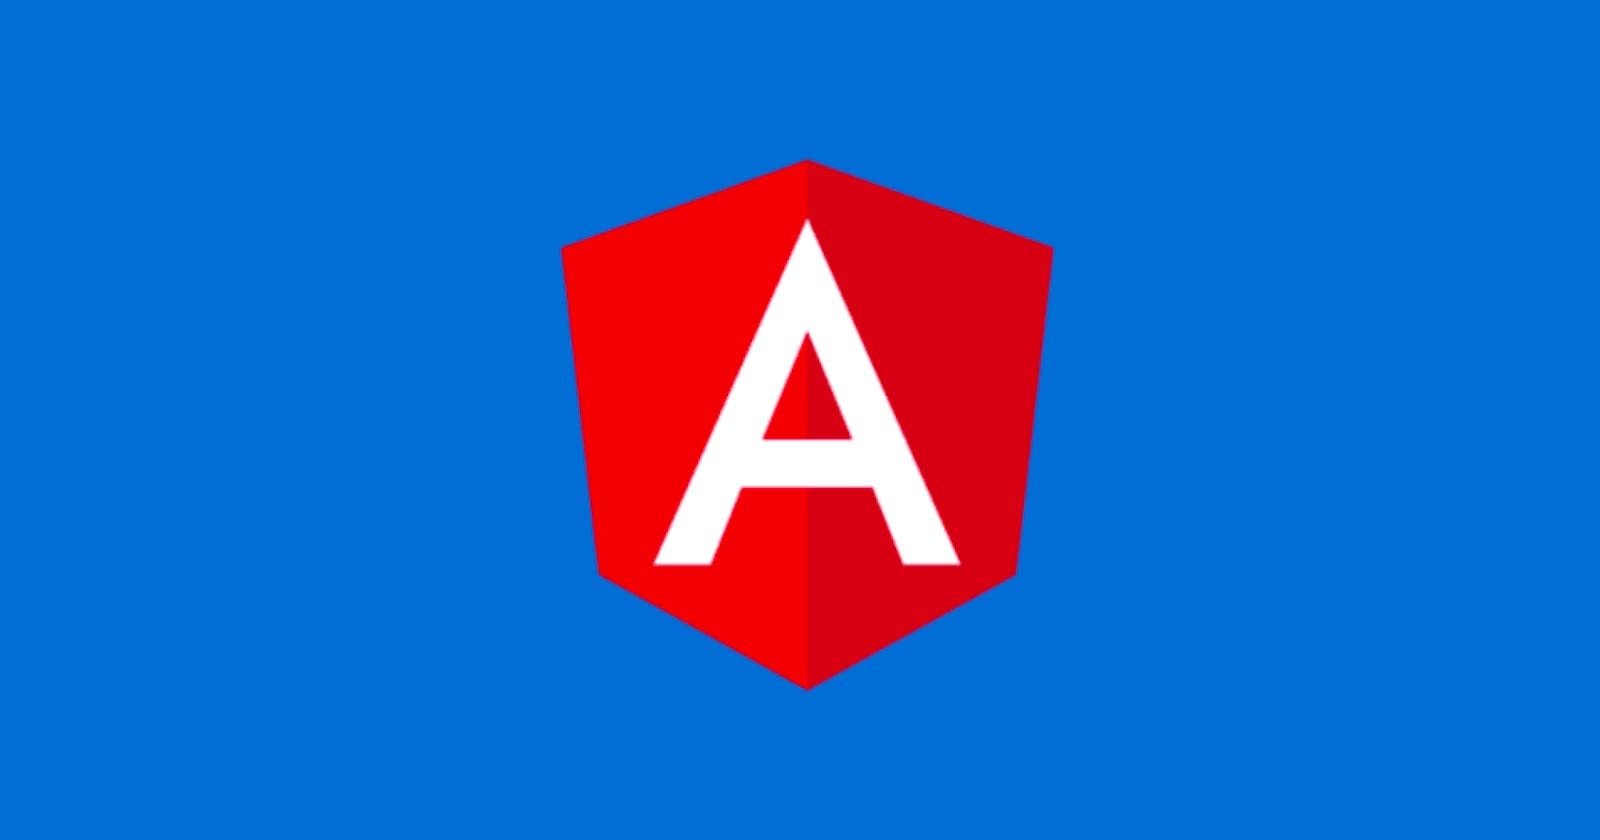 Why you should upgrade to the latest version of Angular?